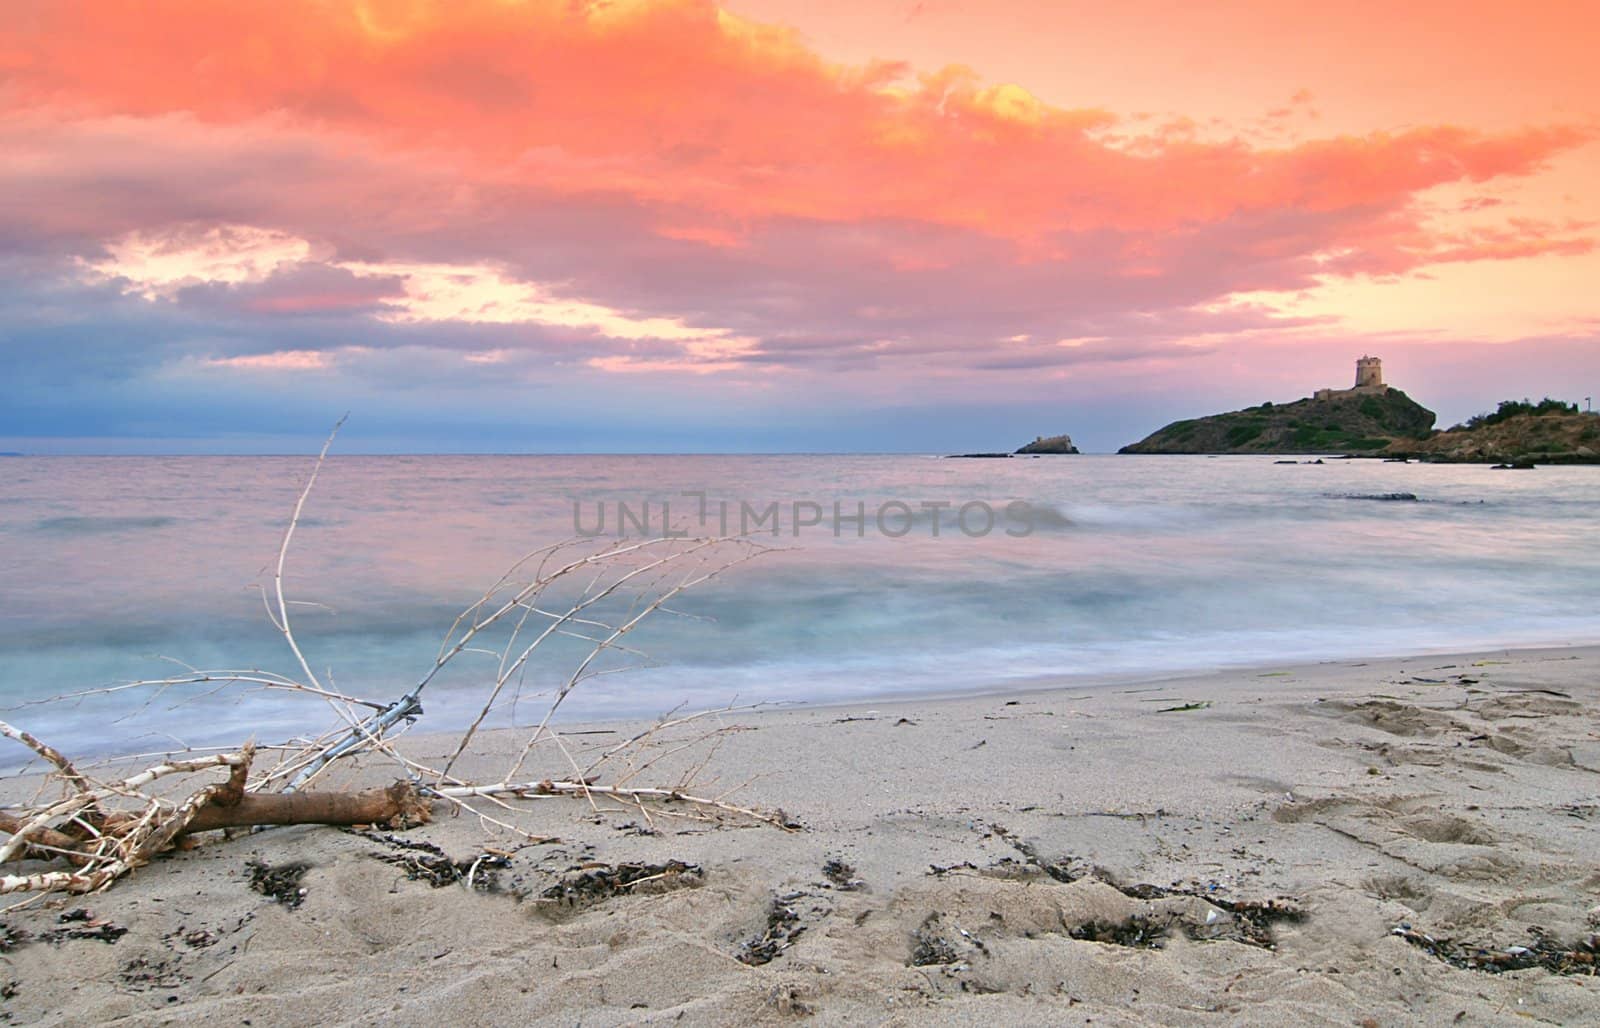 Fairytale sunrise on Sardinia - beach is washed by surf, lighthouse in the back